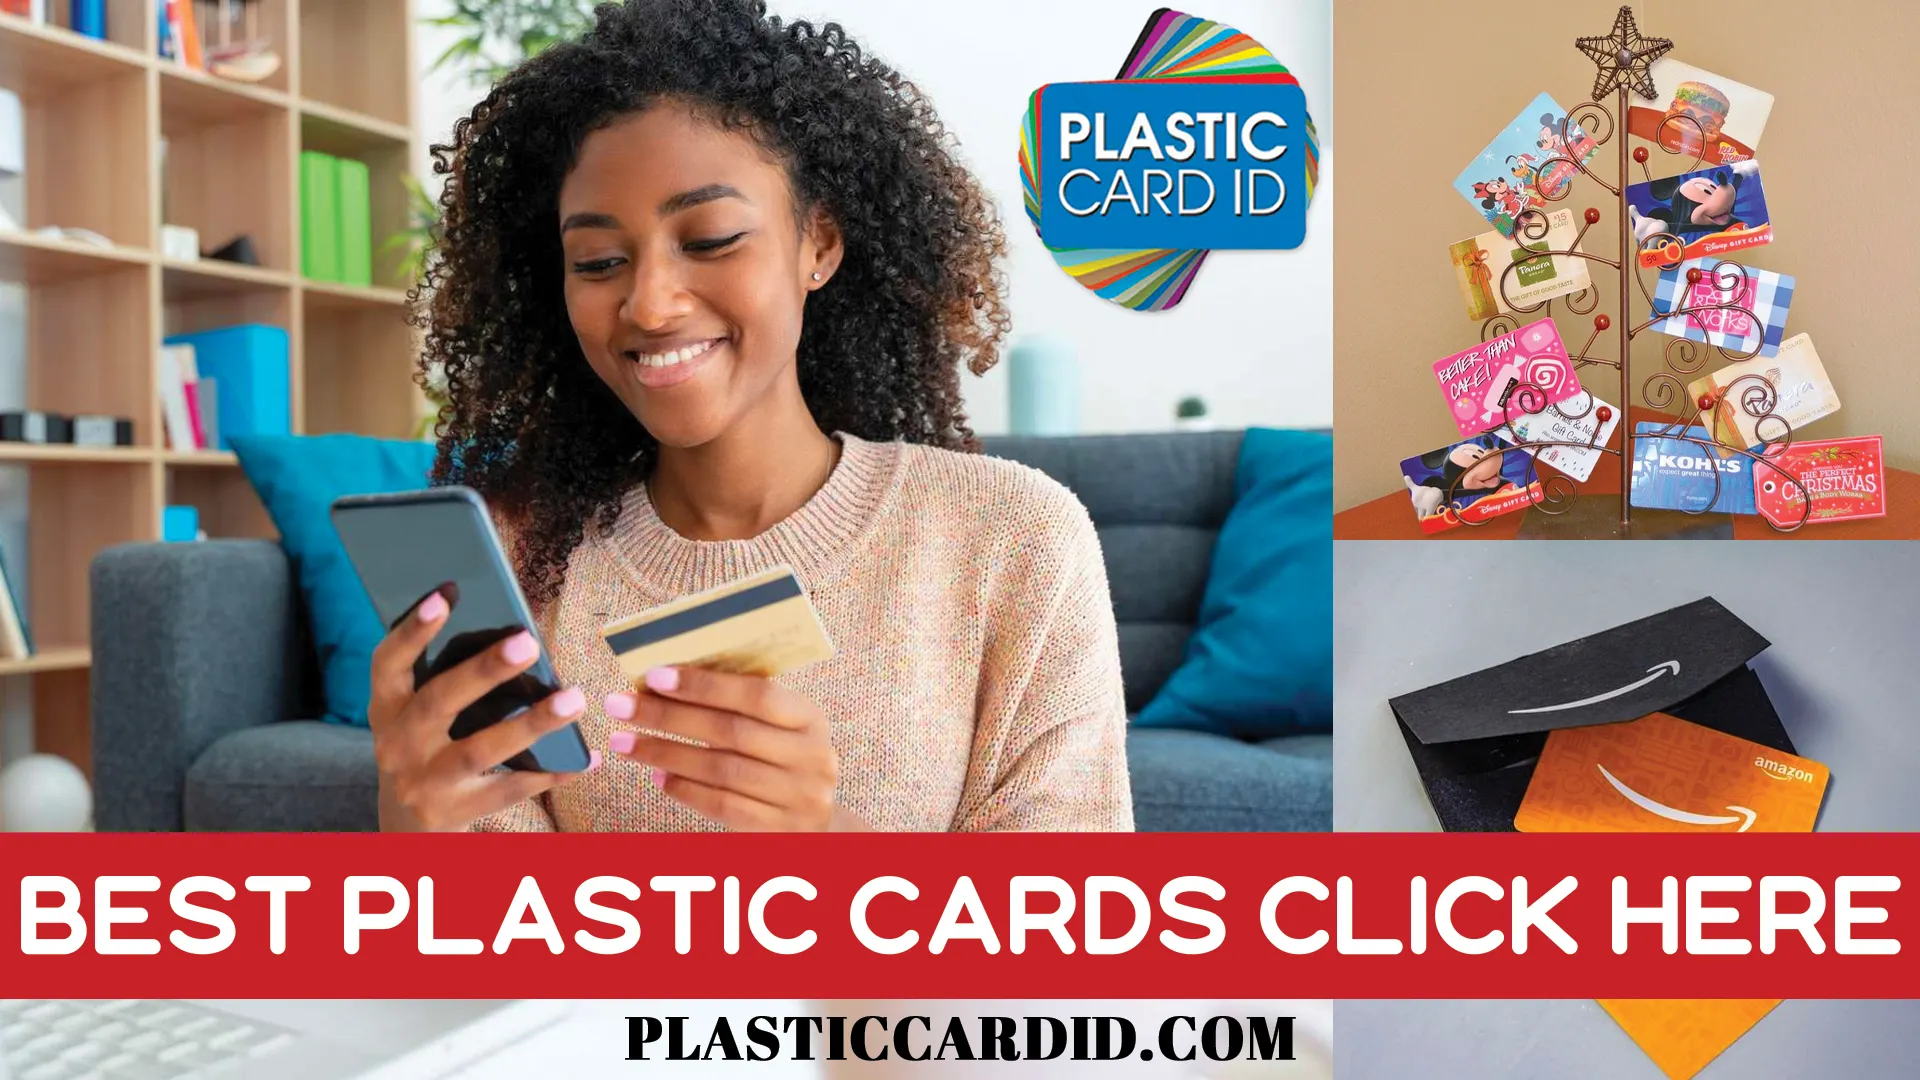 Welcome to the World of Cutting-Edge Plastic Card Aesthetics